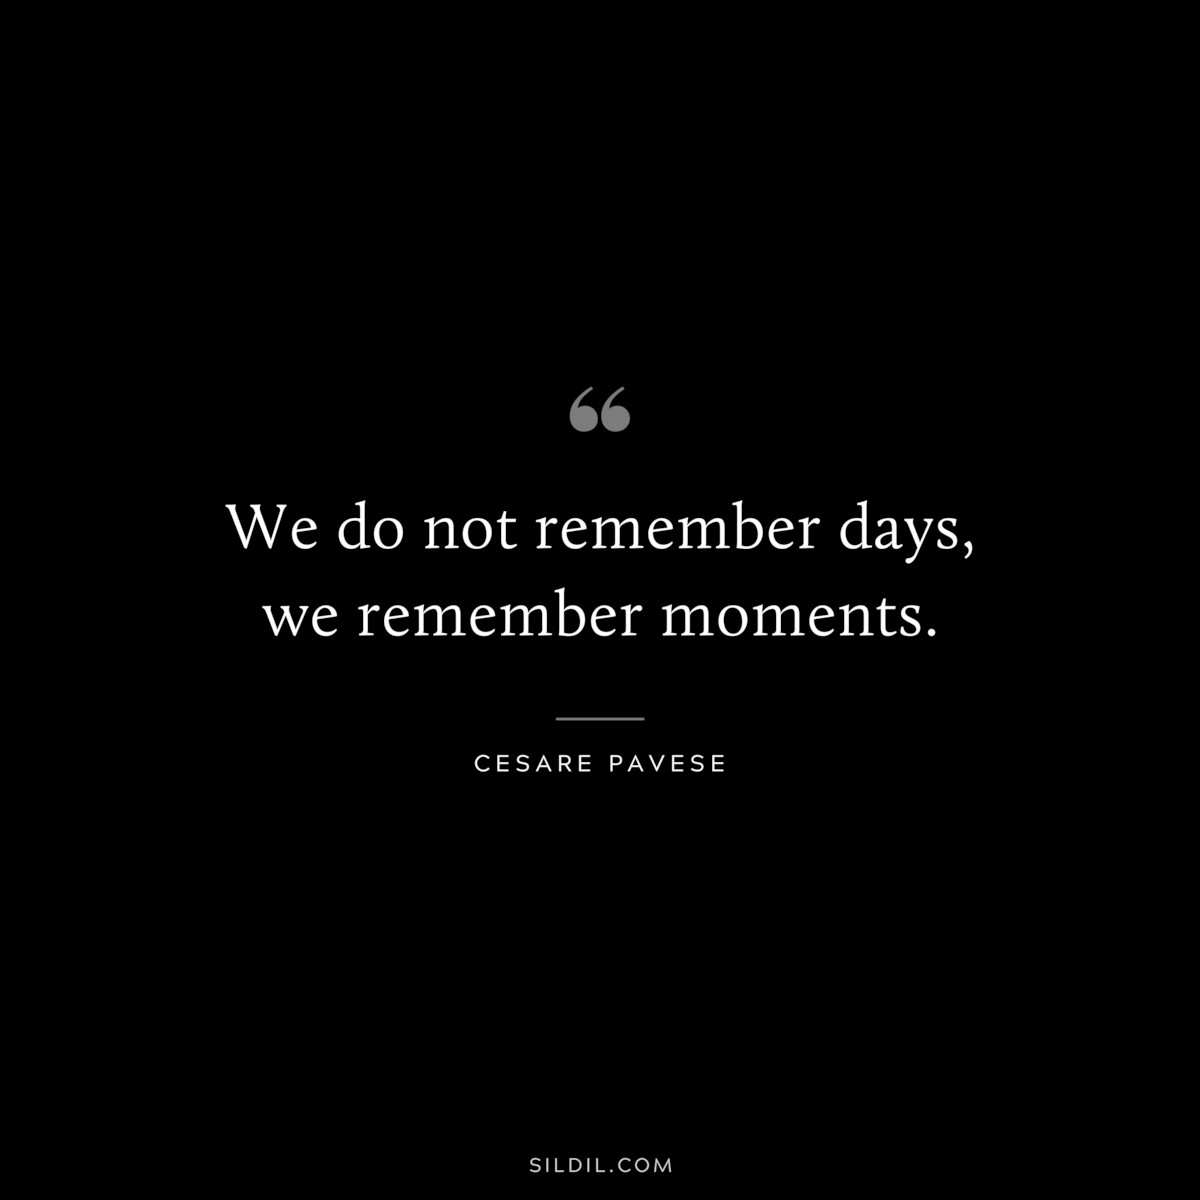 We do not remember days, we remember moments. ― Cesare Pavese